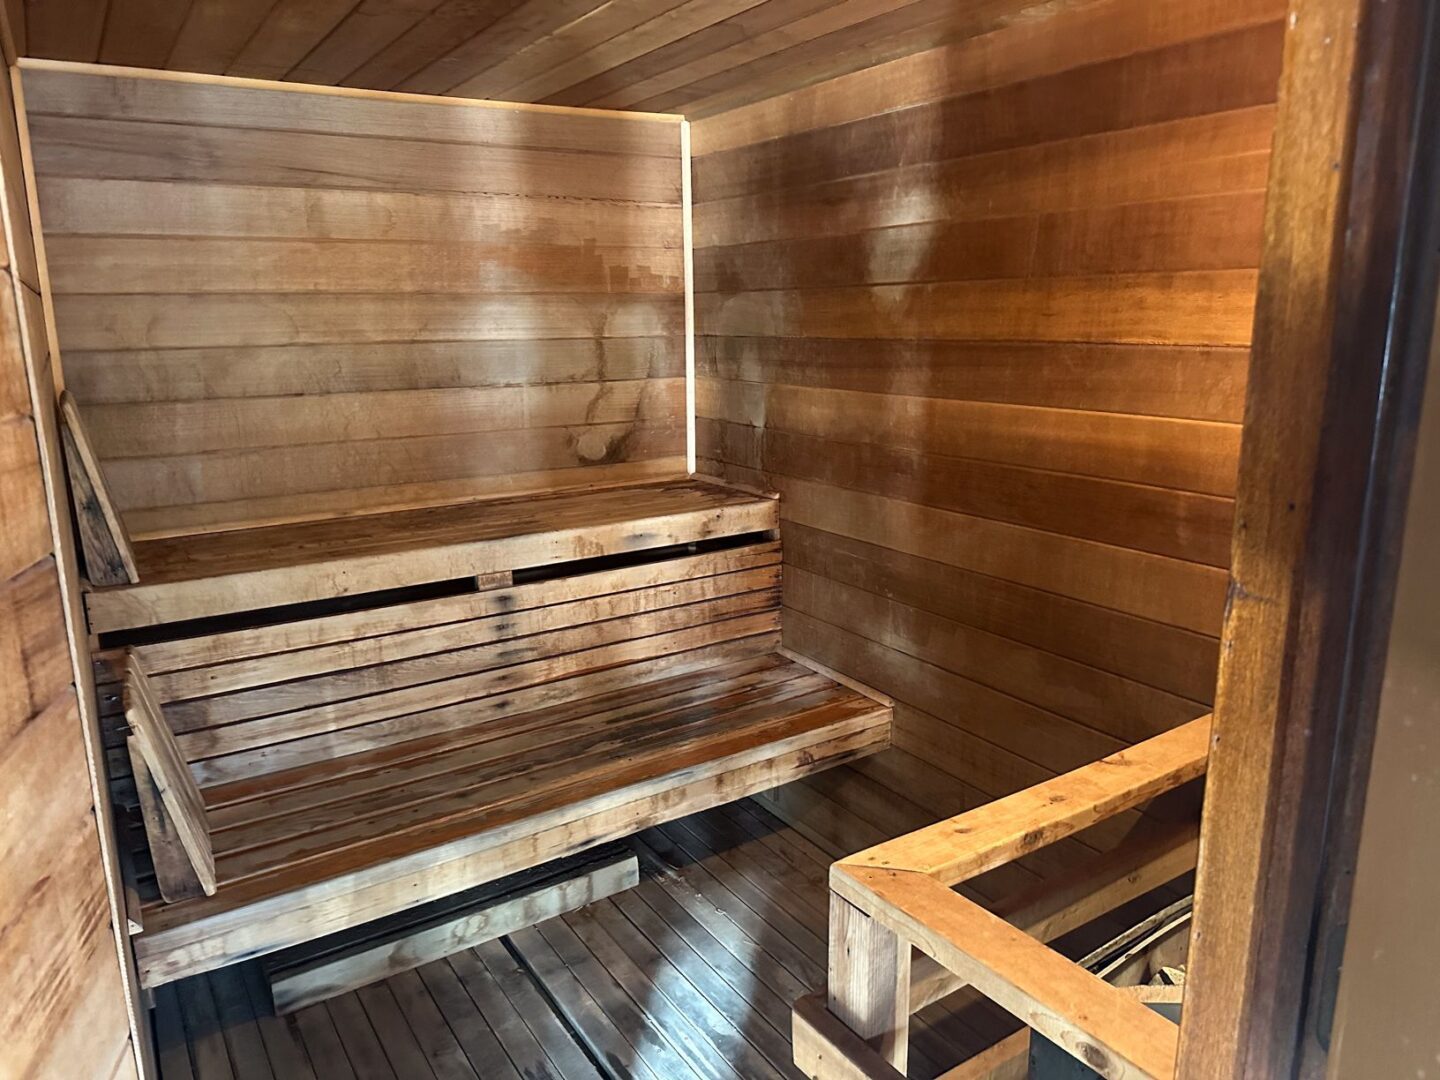 A sauna room with wooden benches and a wooden floor.